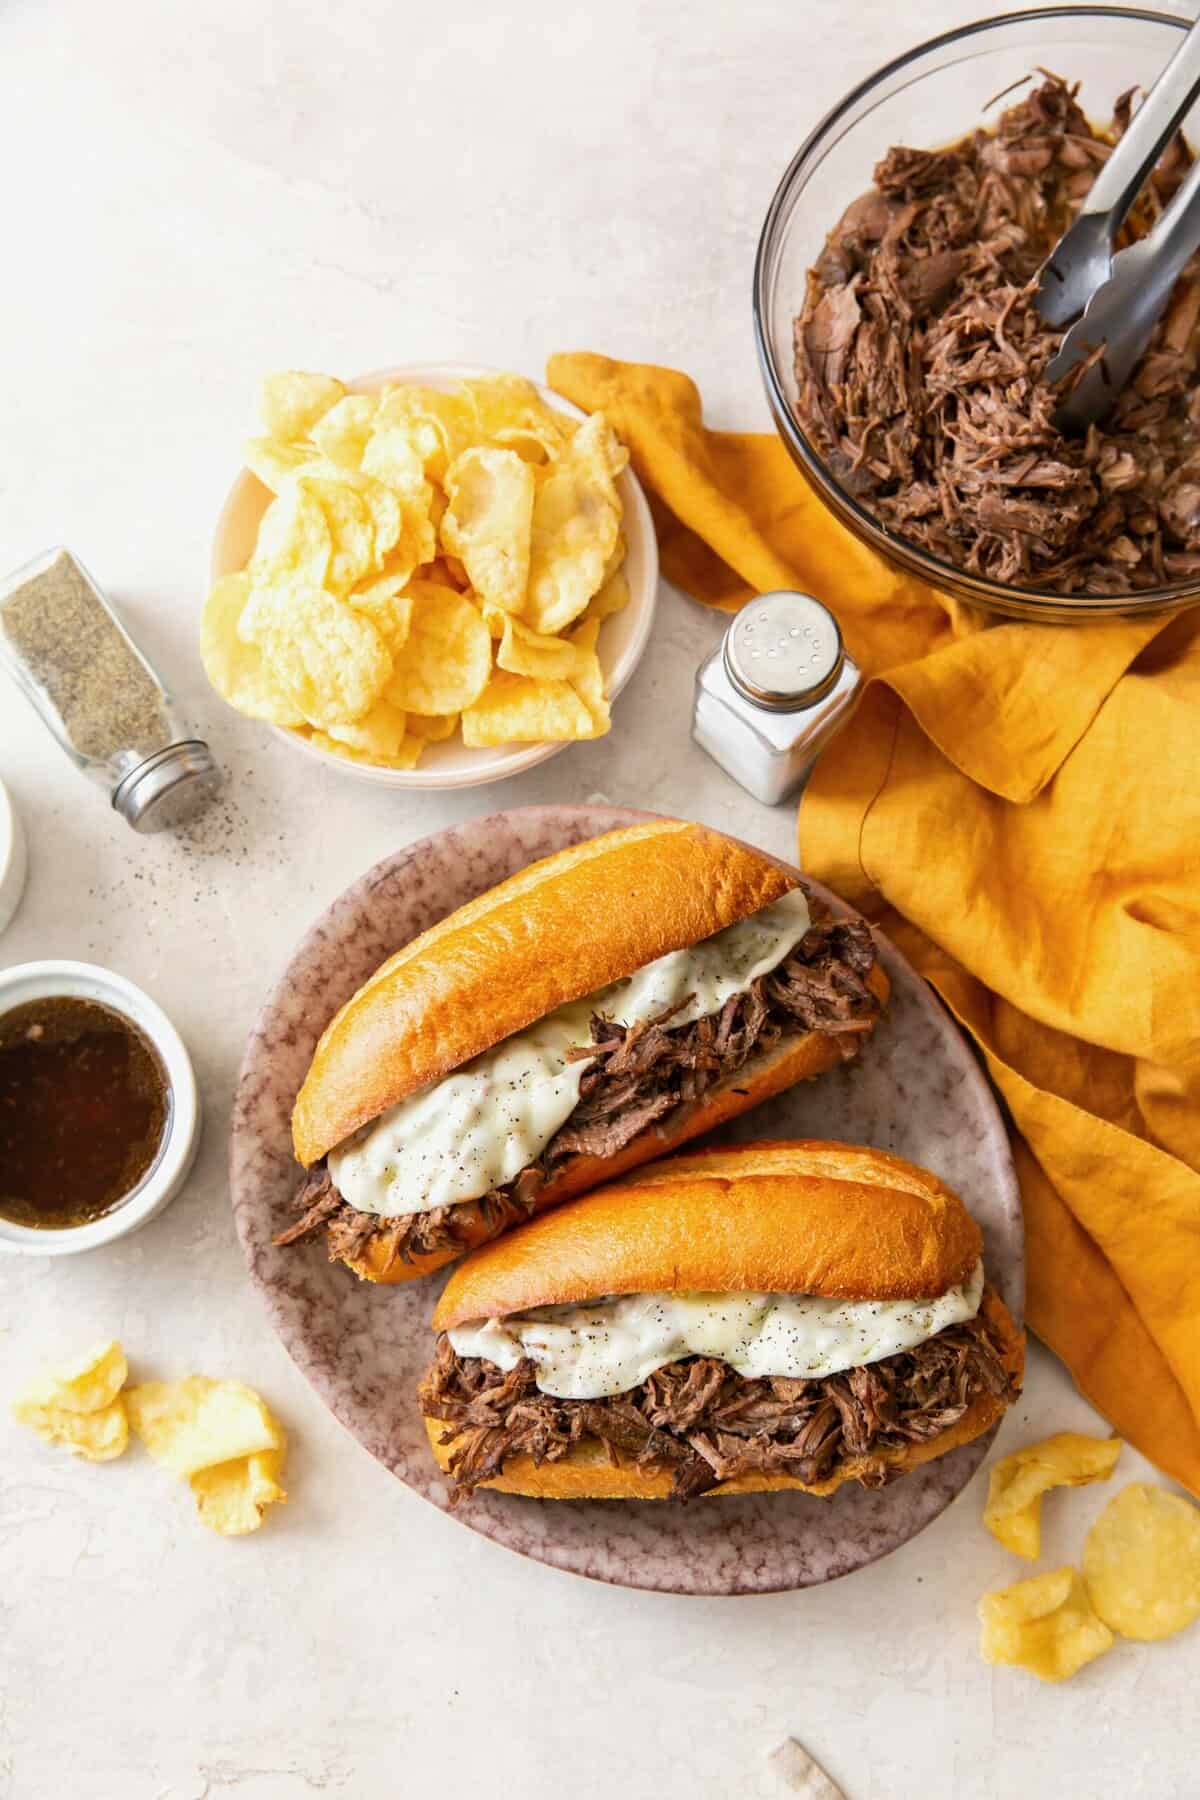 Freshly assembled Slow-Sooker French Dip Sandwiches ready to enjoy